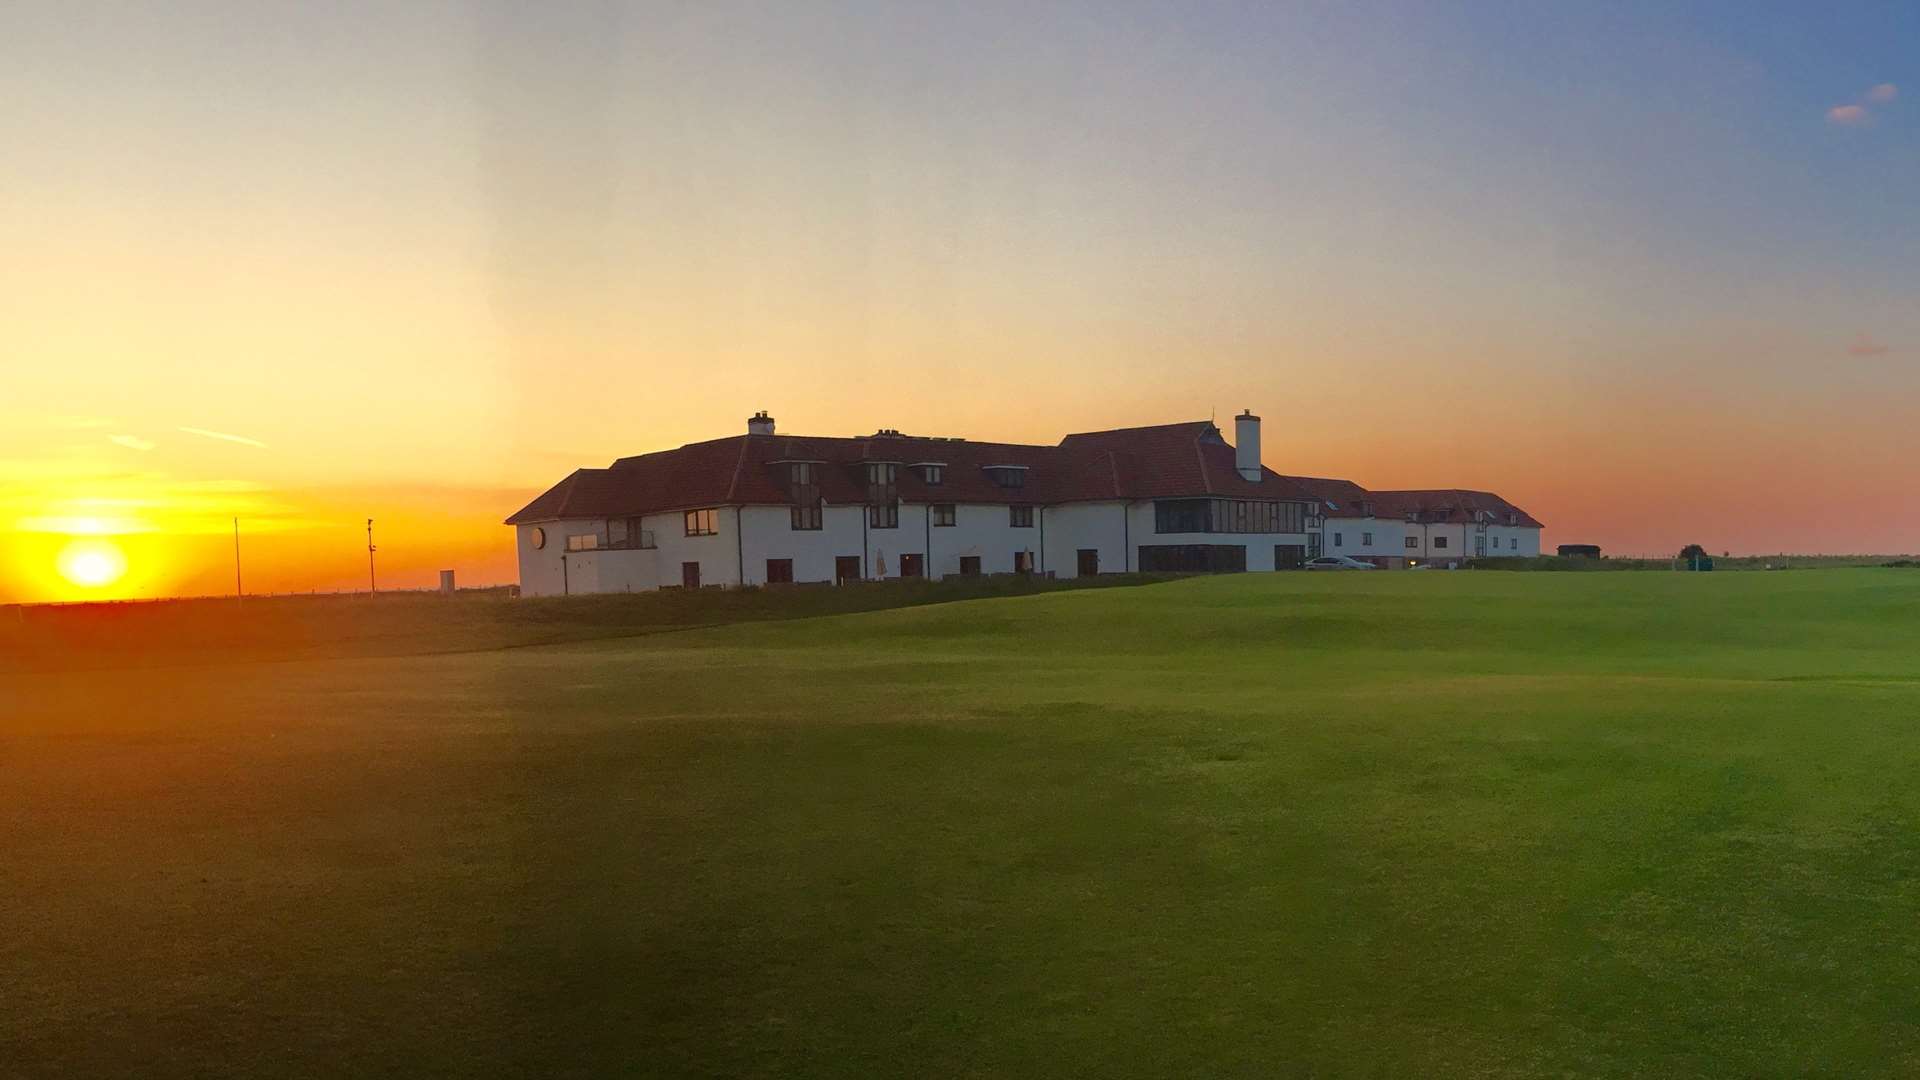 The clubhouse at Princes Golf Club in Sandwich was built by Ramac Group